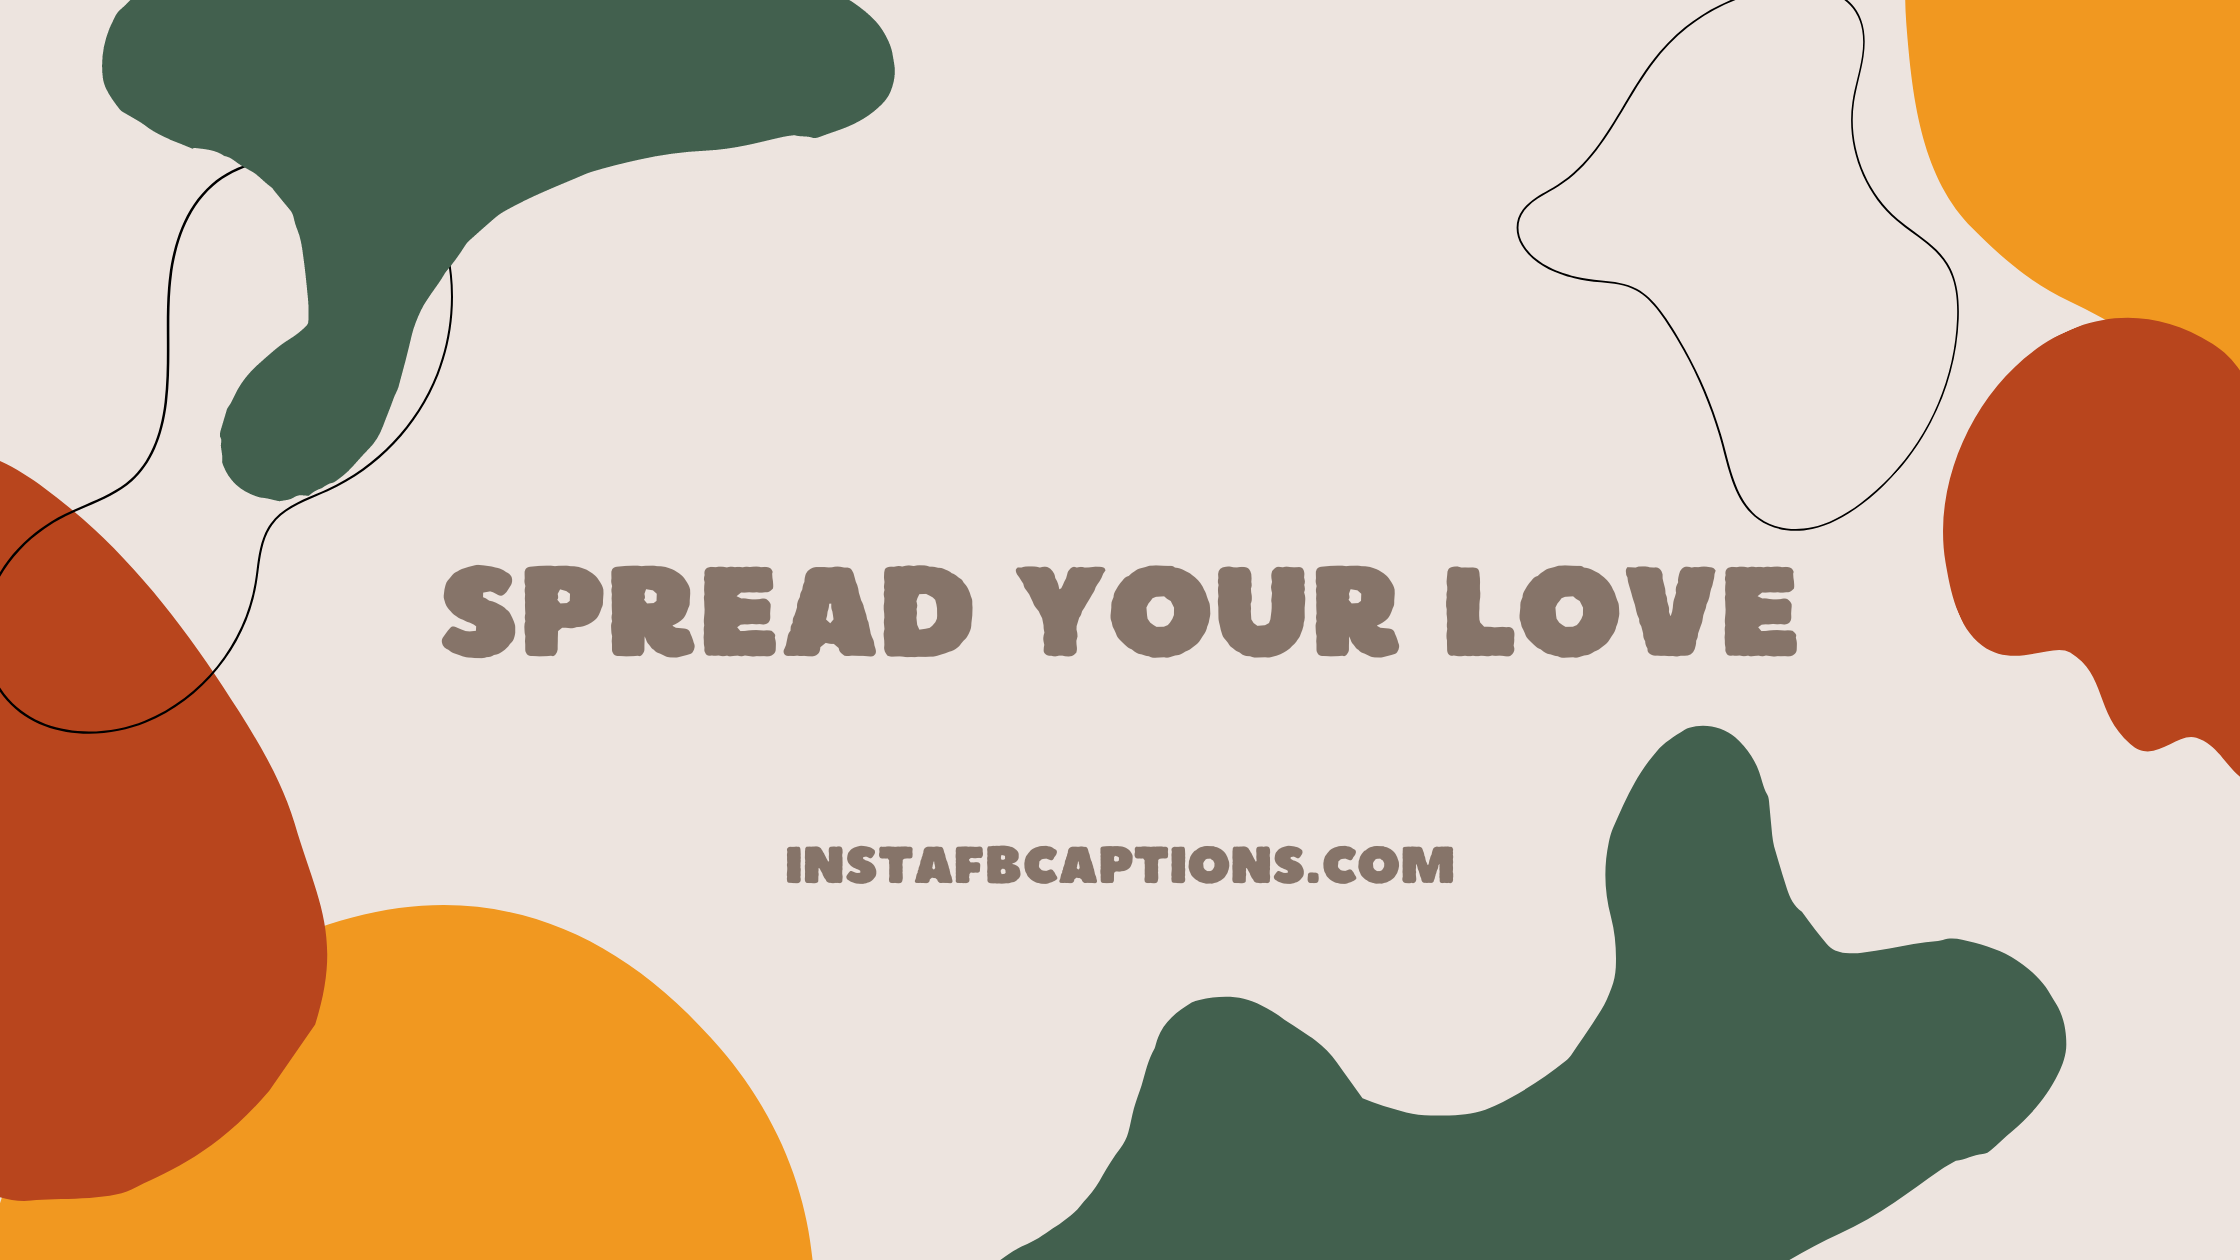 3 Word Love Captions  - 3 Word Love Captions - Three Word Captions Quotes for Instagram Photos in 2022